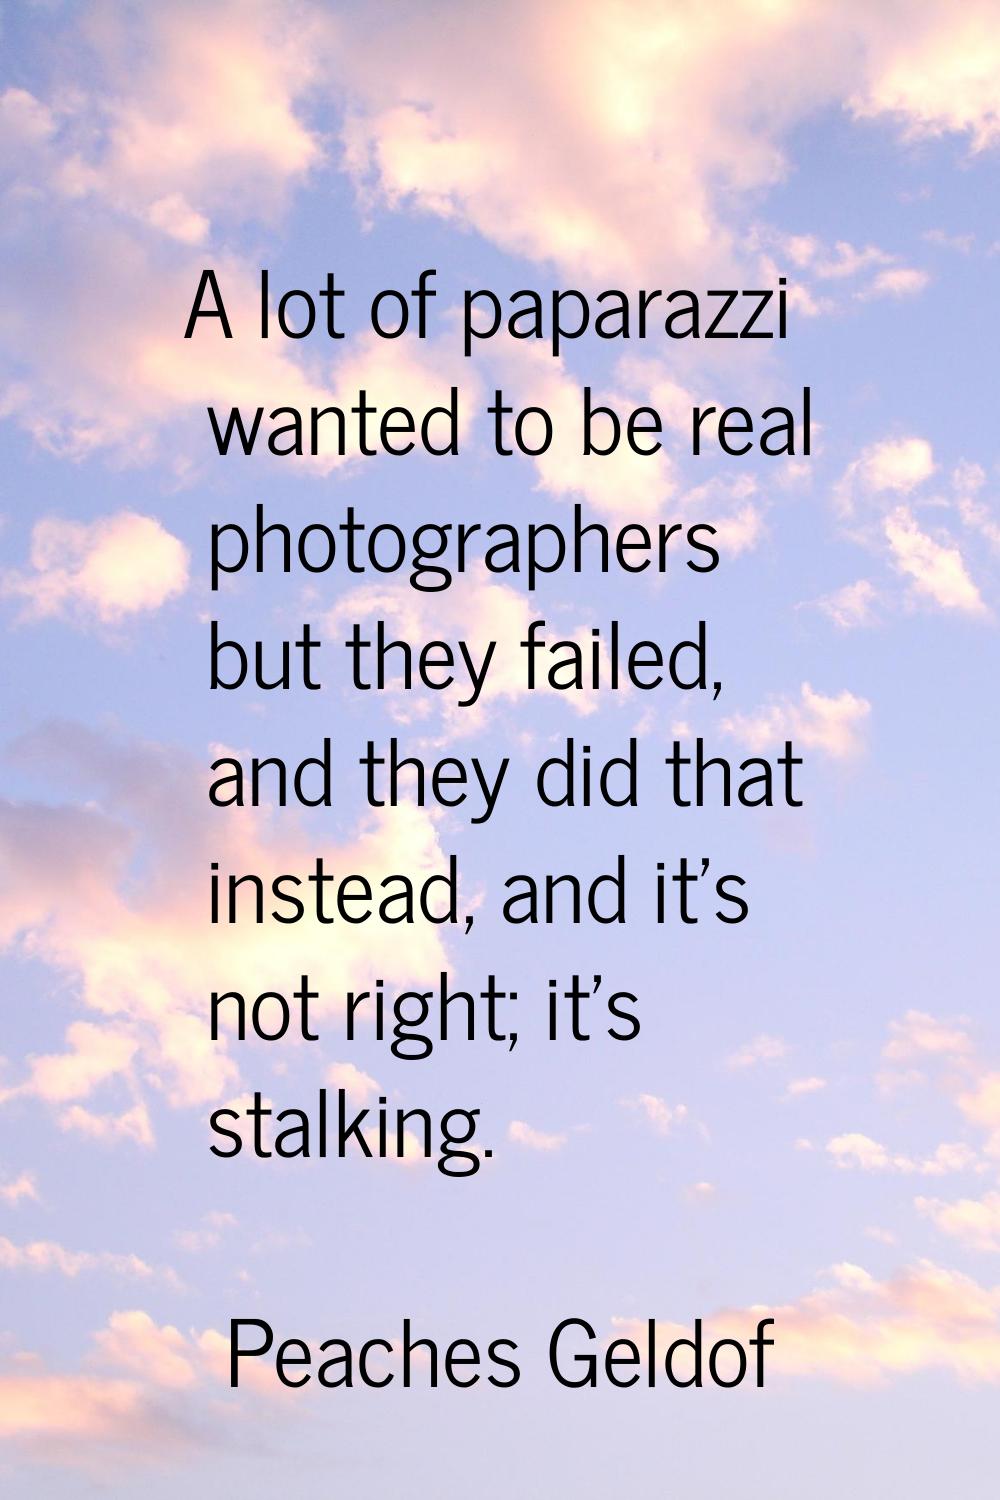 A lot of paparazzi wanted to be real photographers but they failed, and they did that instead, and 